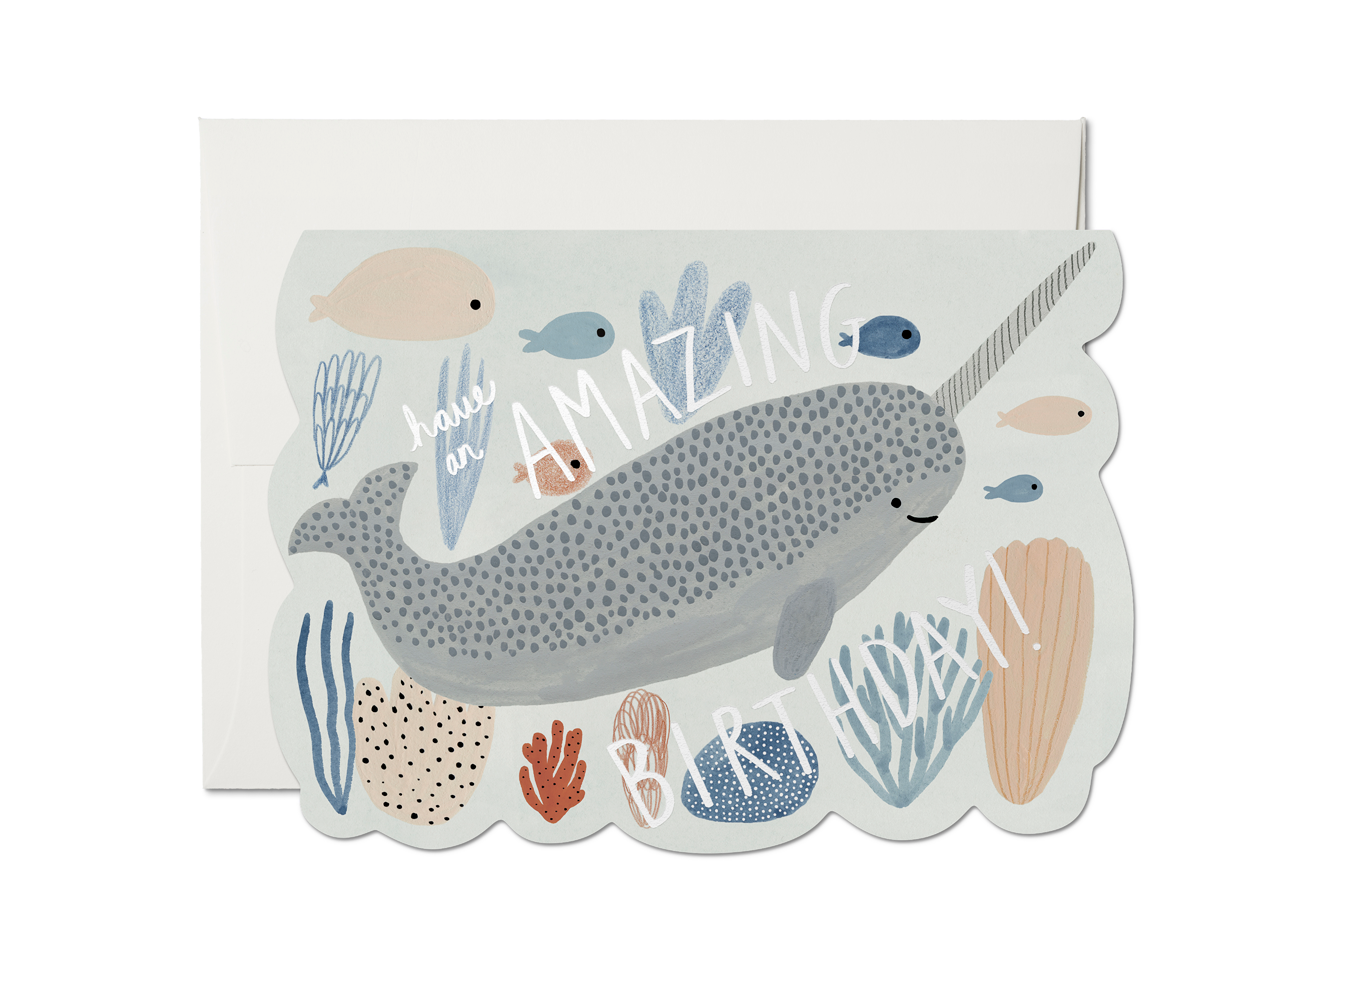 Red Cap Cards “Narwhal Birthday" Card